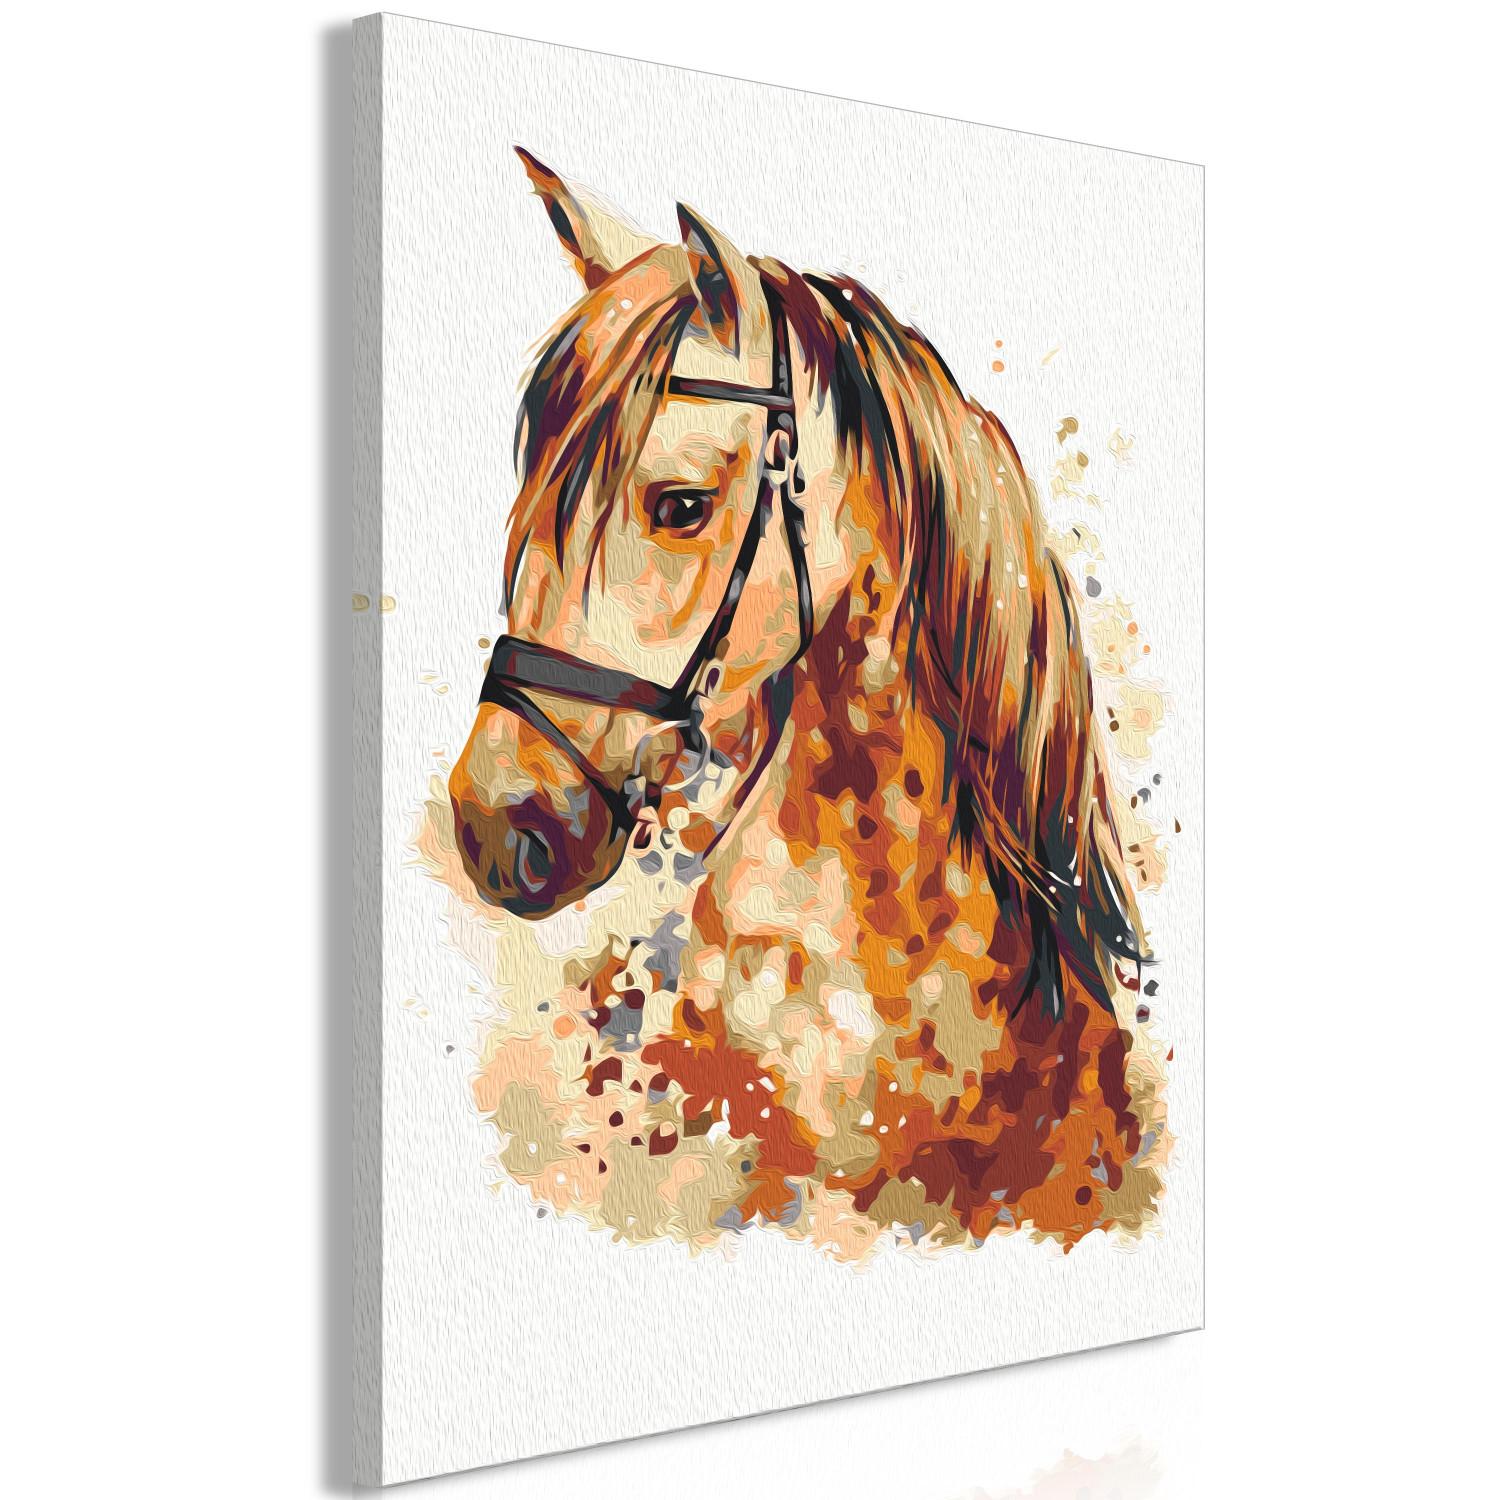 Paint by Number Kit Horse Portrait - Animal With a Beautiful Mane on a Gray Background